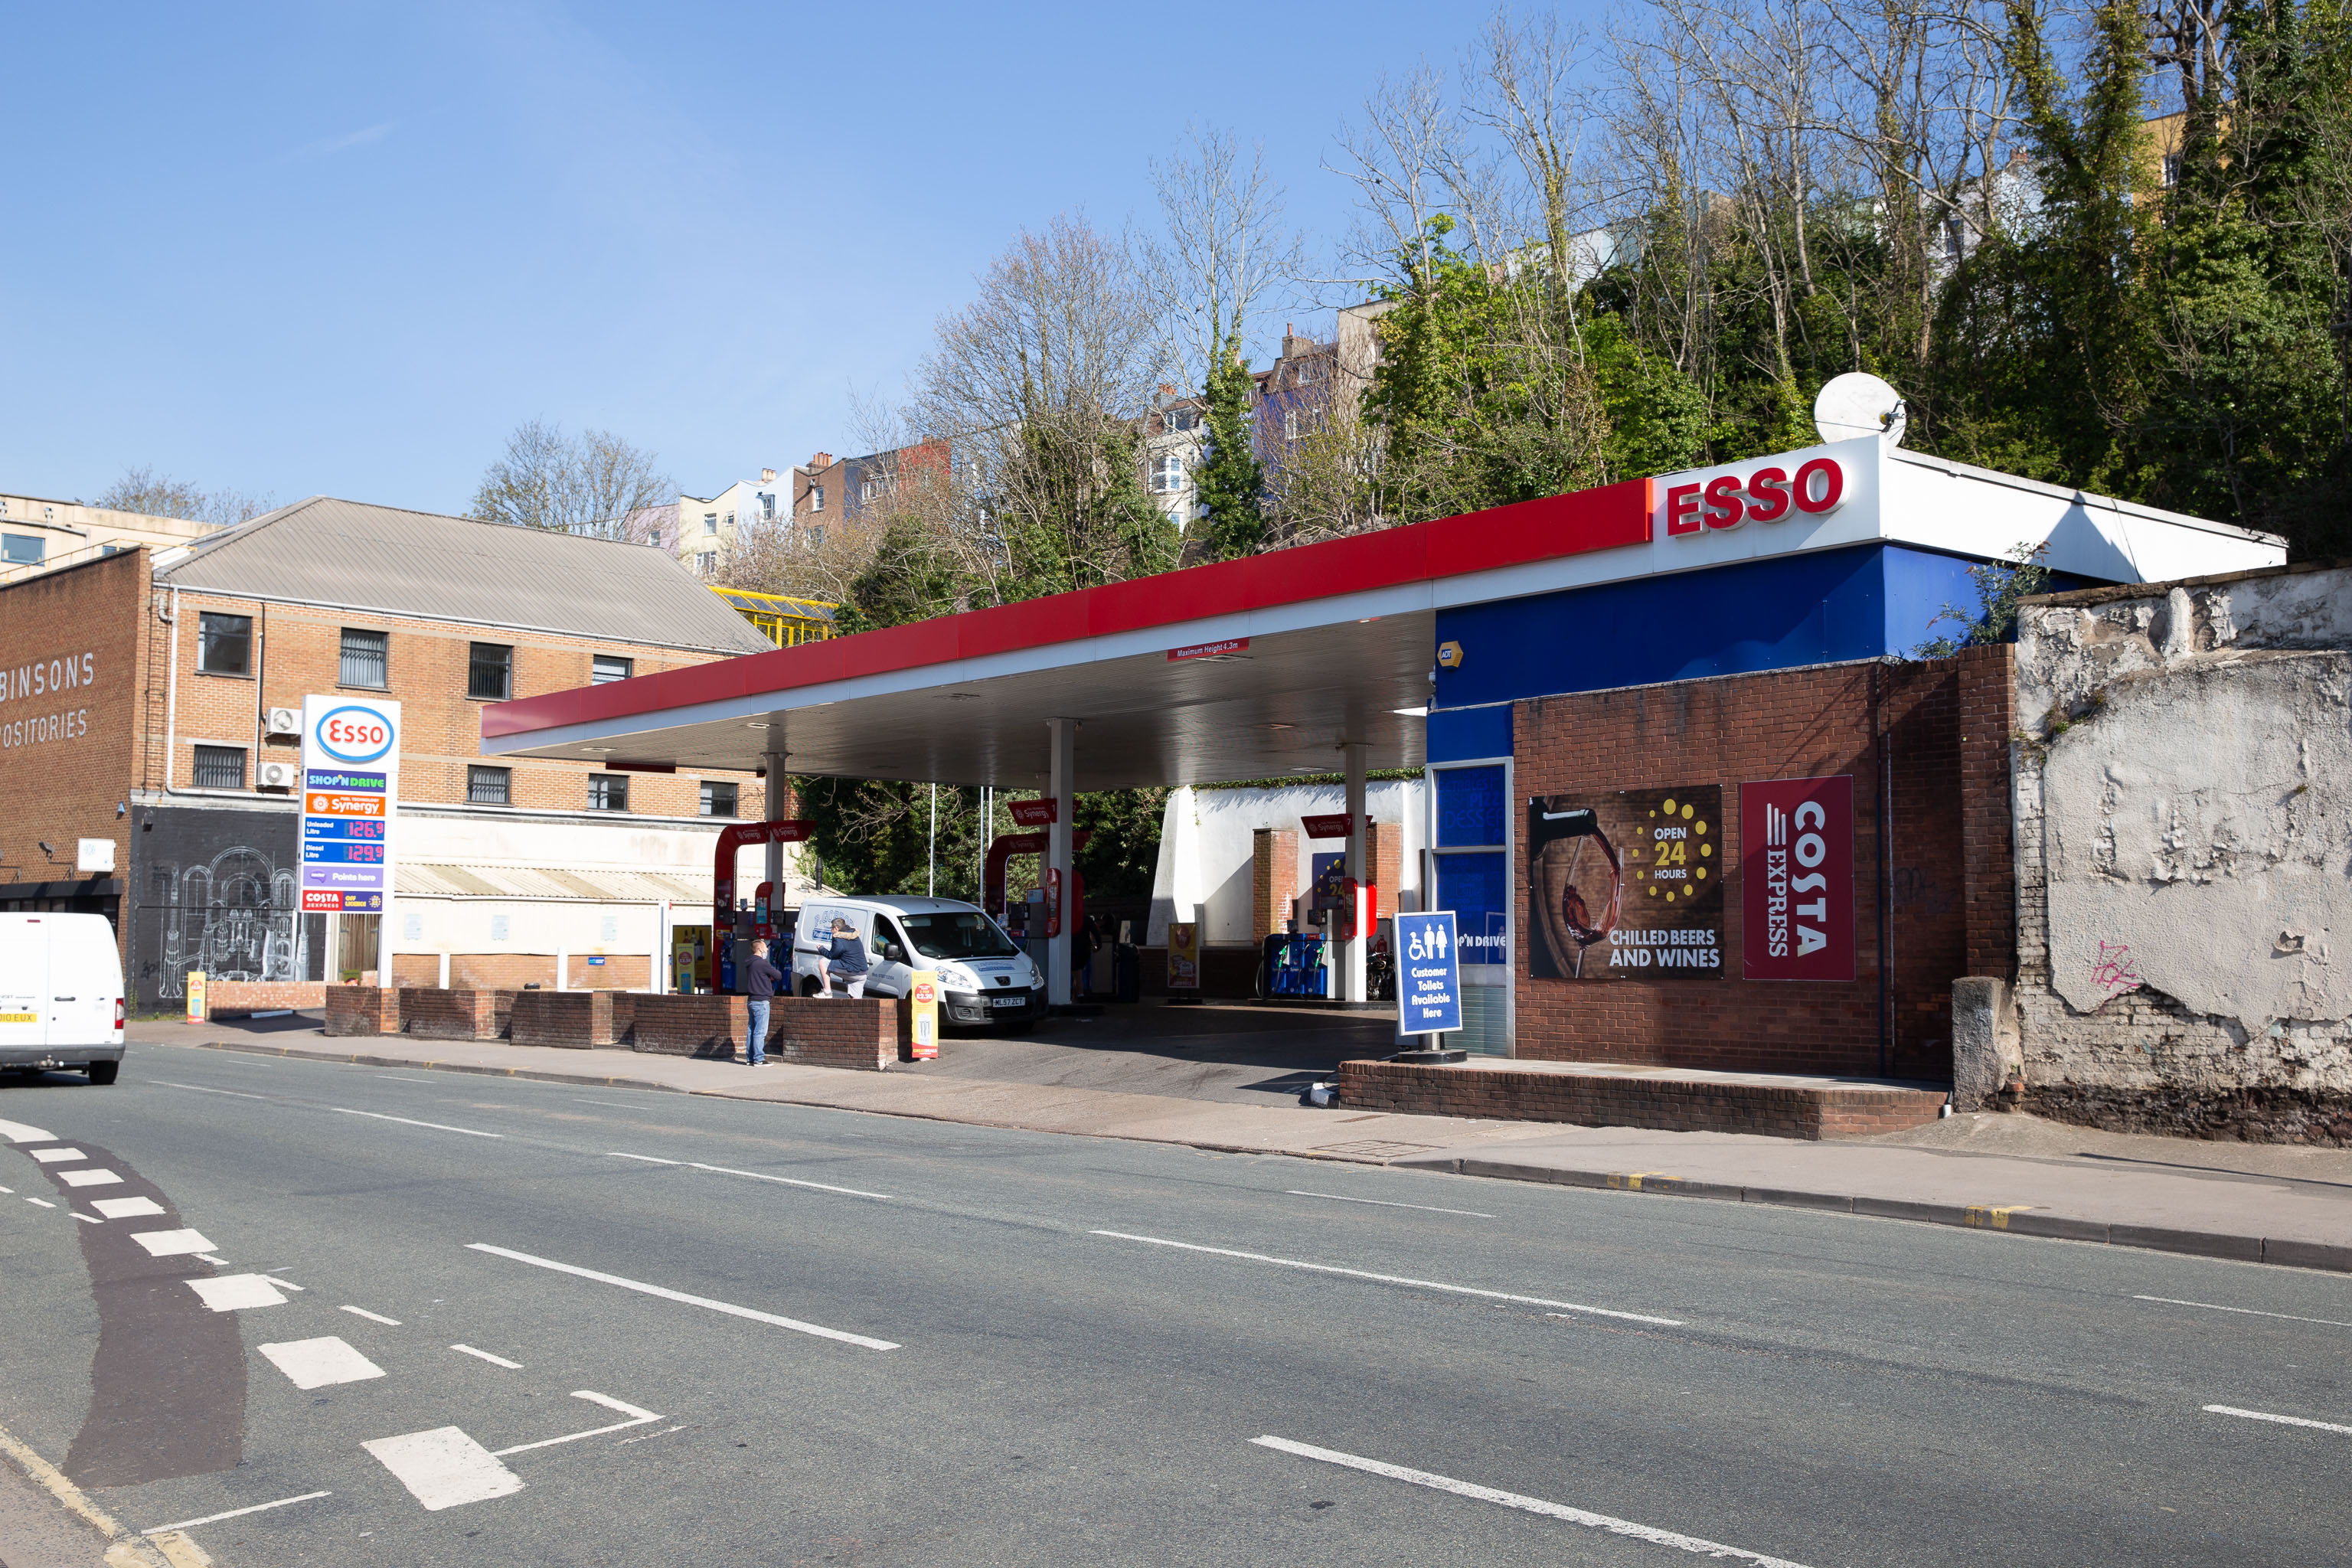 ESSO
Who was it that decided that petrol stations had to be ugly? It's not like oil companies don't have money...
